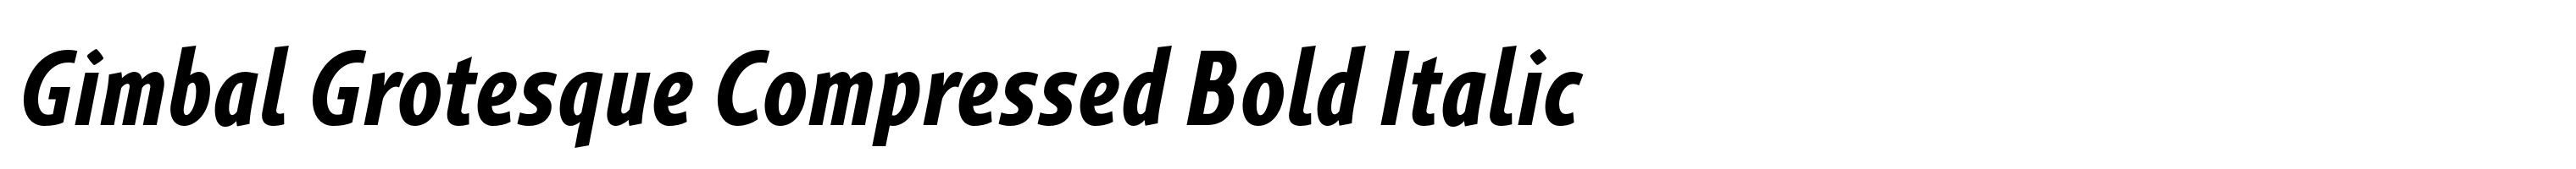 Gimbal Grotesque Compressed Bold Italic